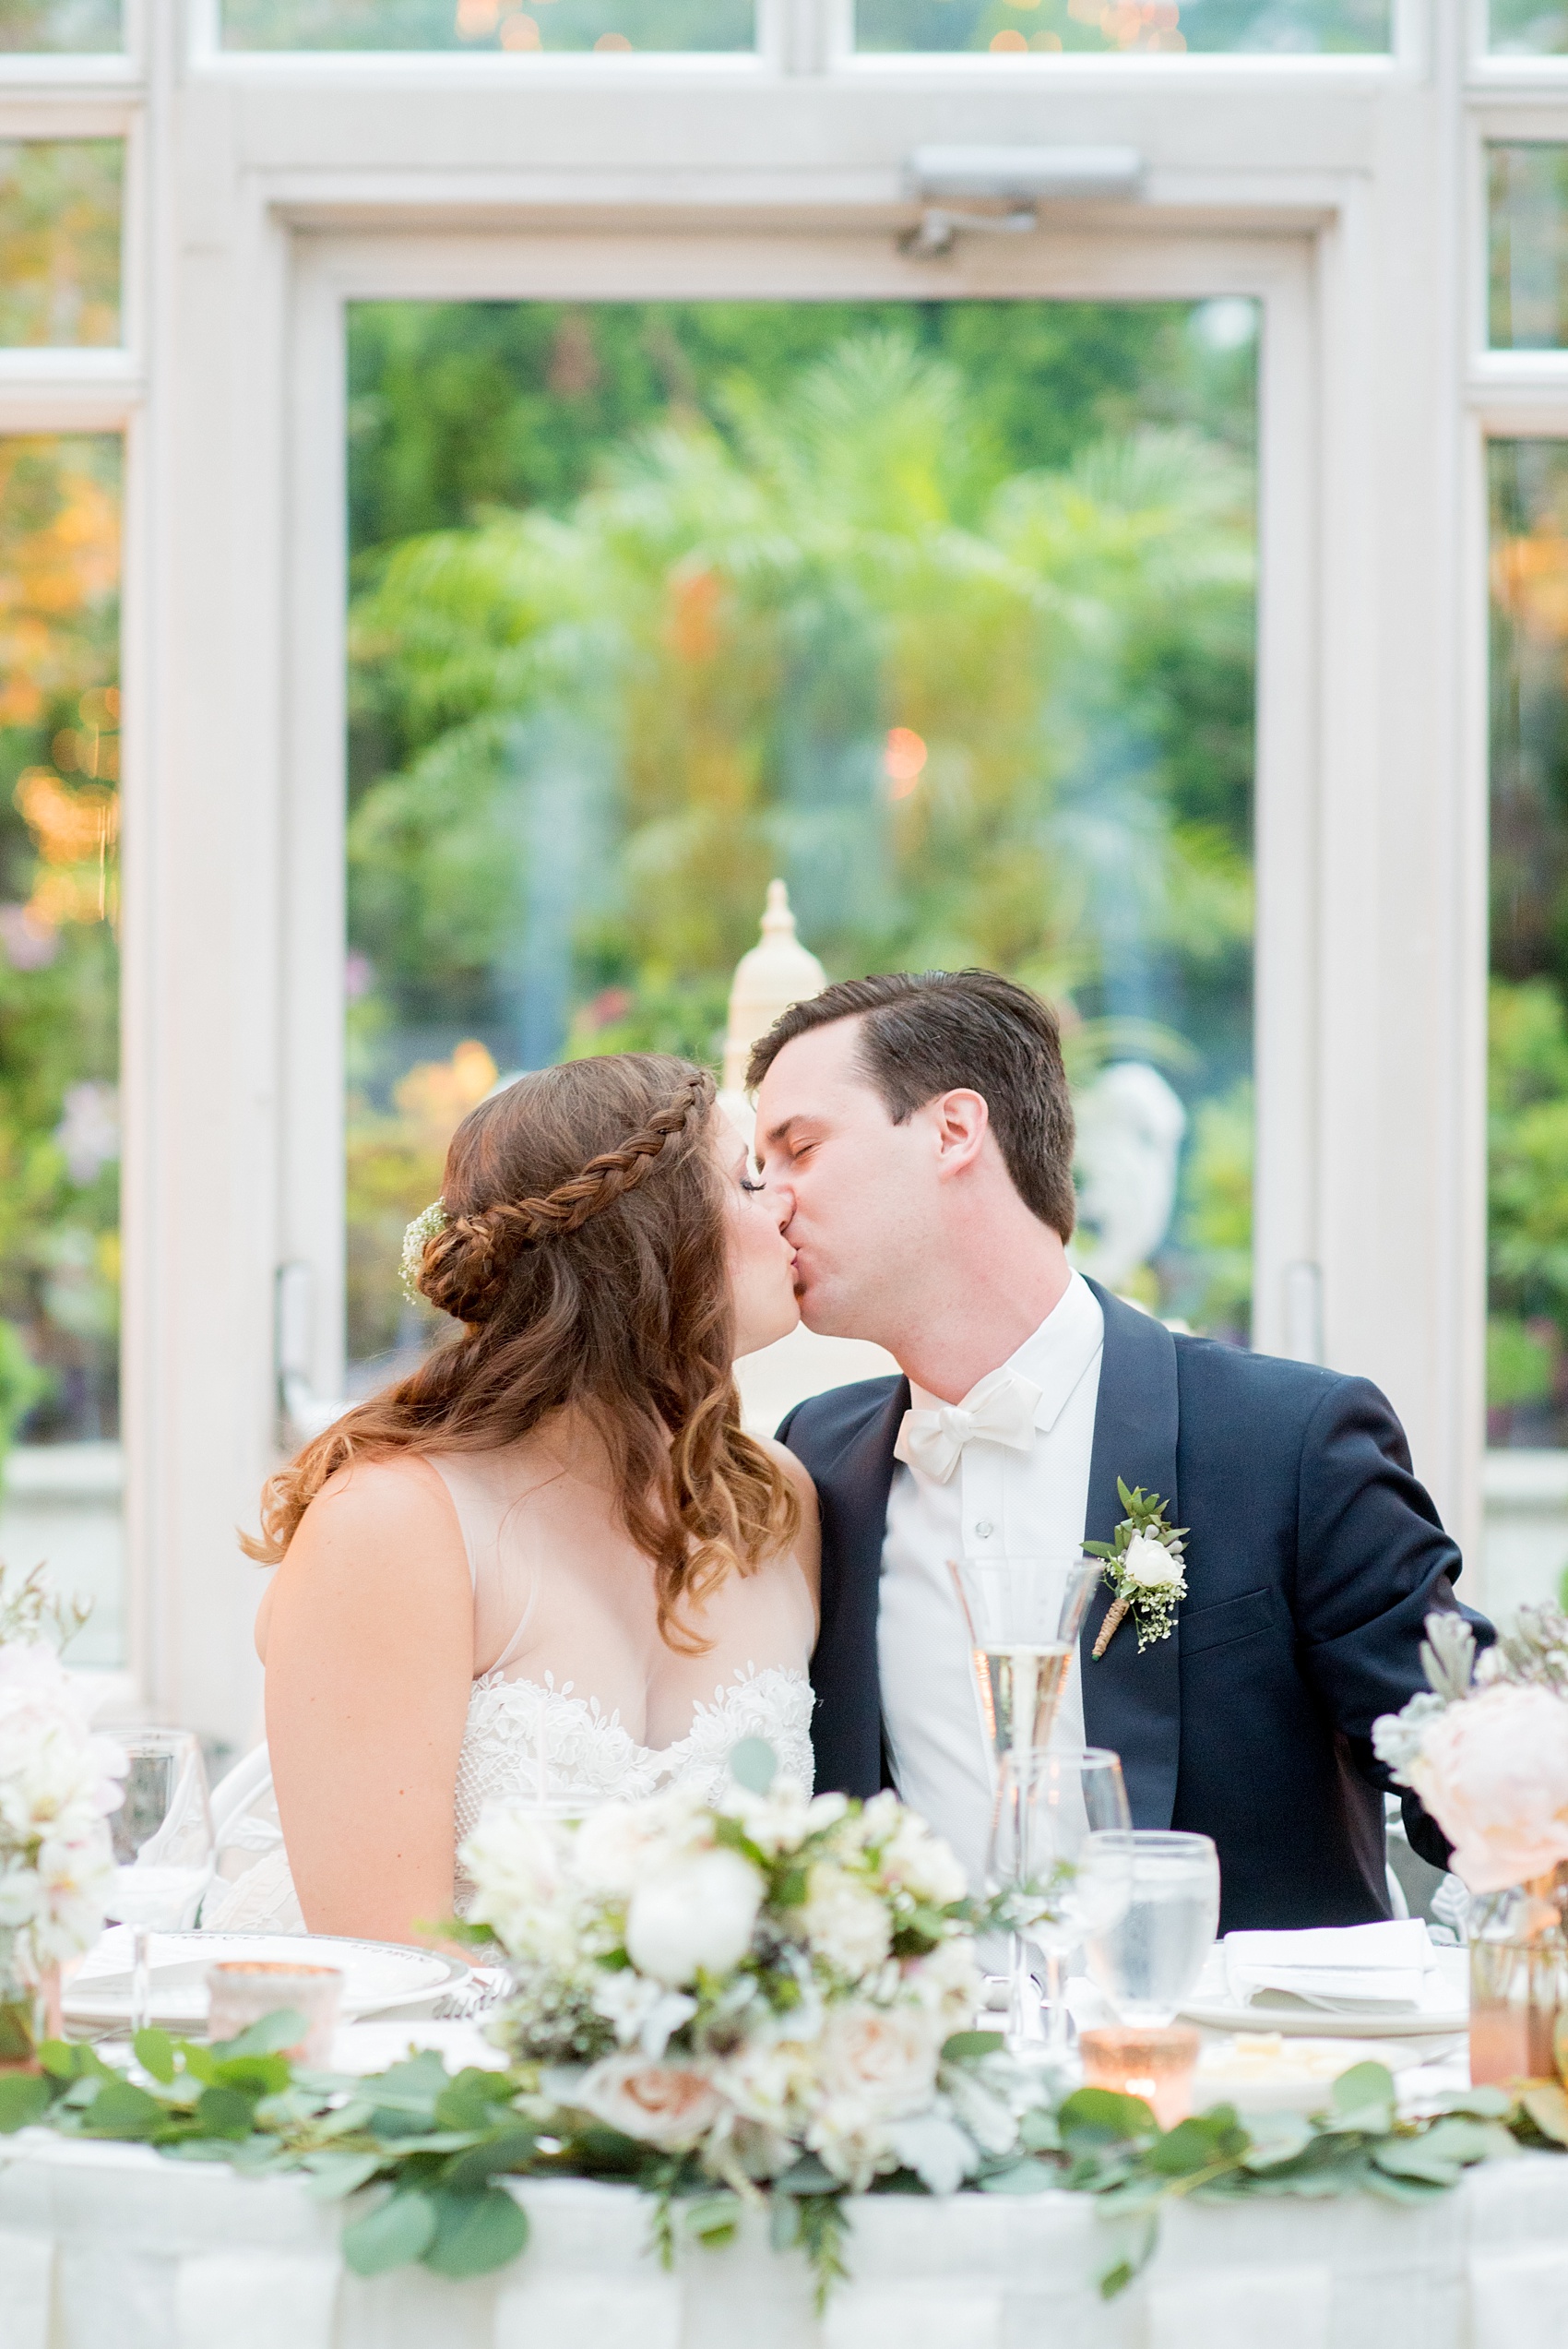 Mikkel Paige Photography photo of a wedding at Madison Hotel in NJ. Photo of the bride and groom at their sweetheart table in The Conservatory.